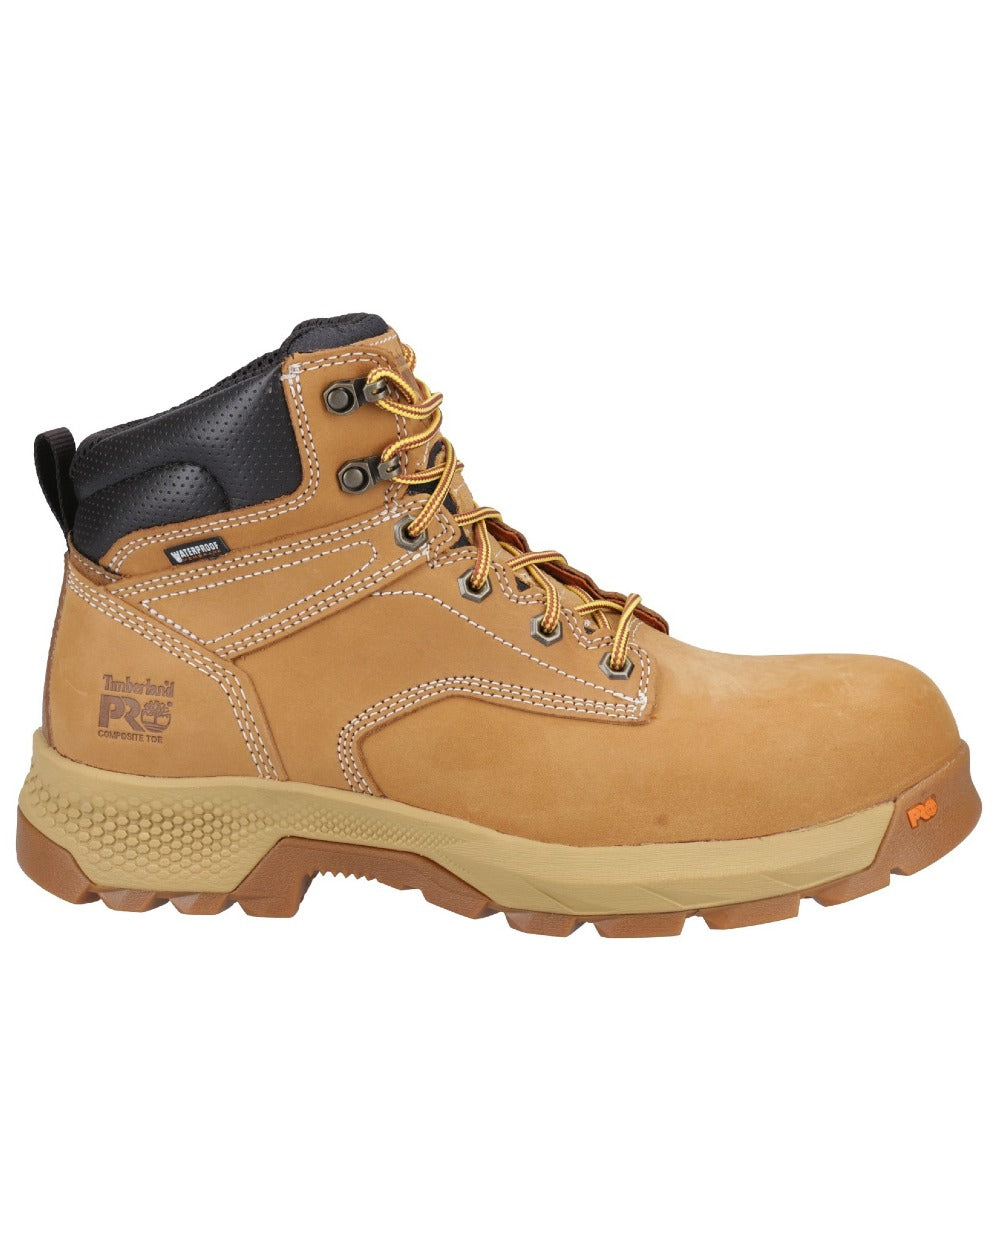 Wheat coloured Timberland Pro Titan 6inch Safety Boots on white background 